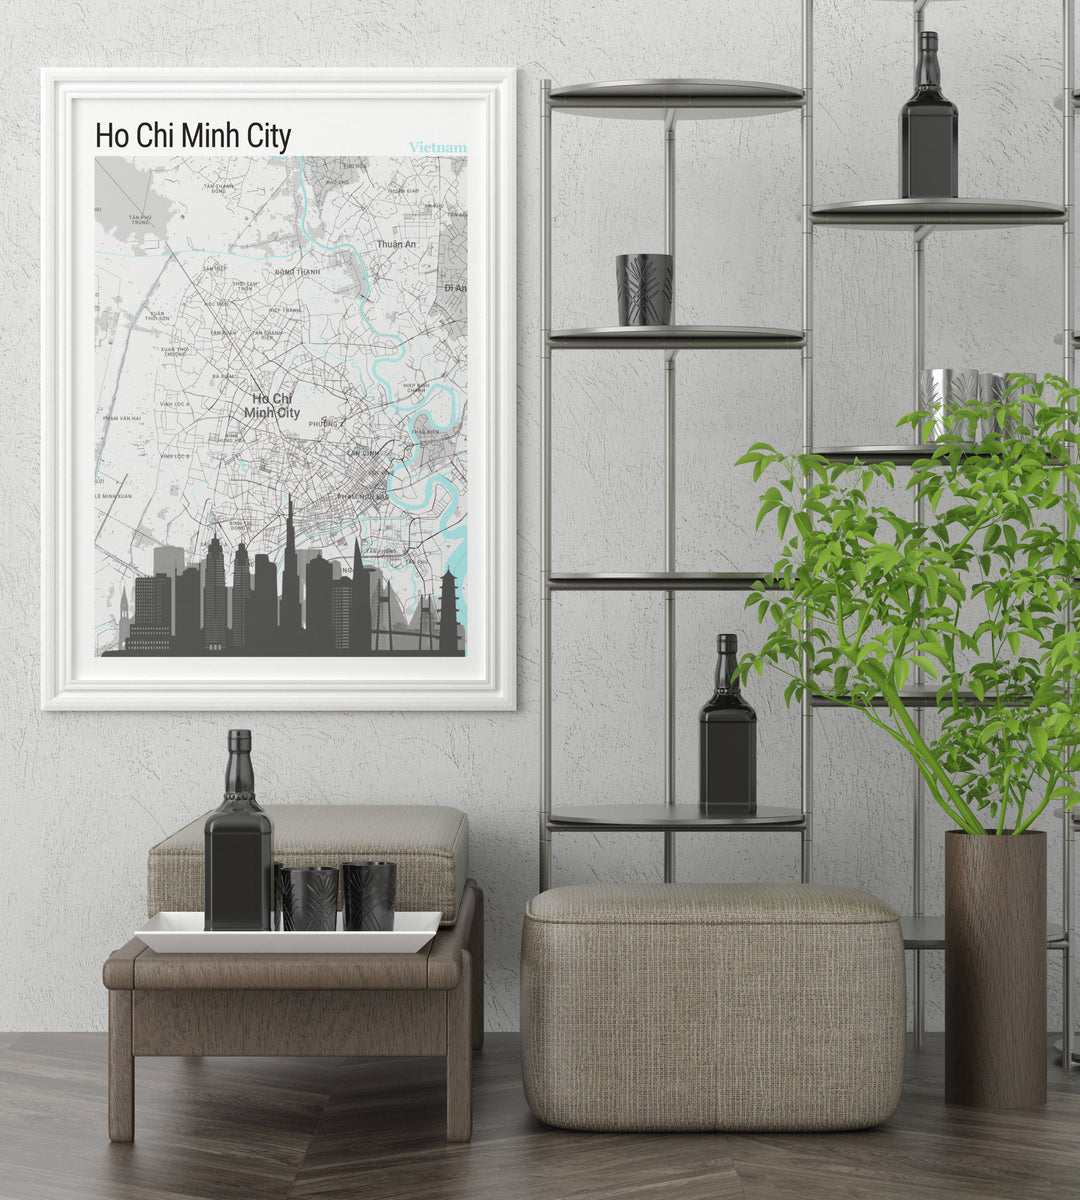 This travel wall art featuring a detailed map of Saigon serves as a constant inspiration for wanderlust, showcasing the citys unique charm and vibrant lifestyle.